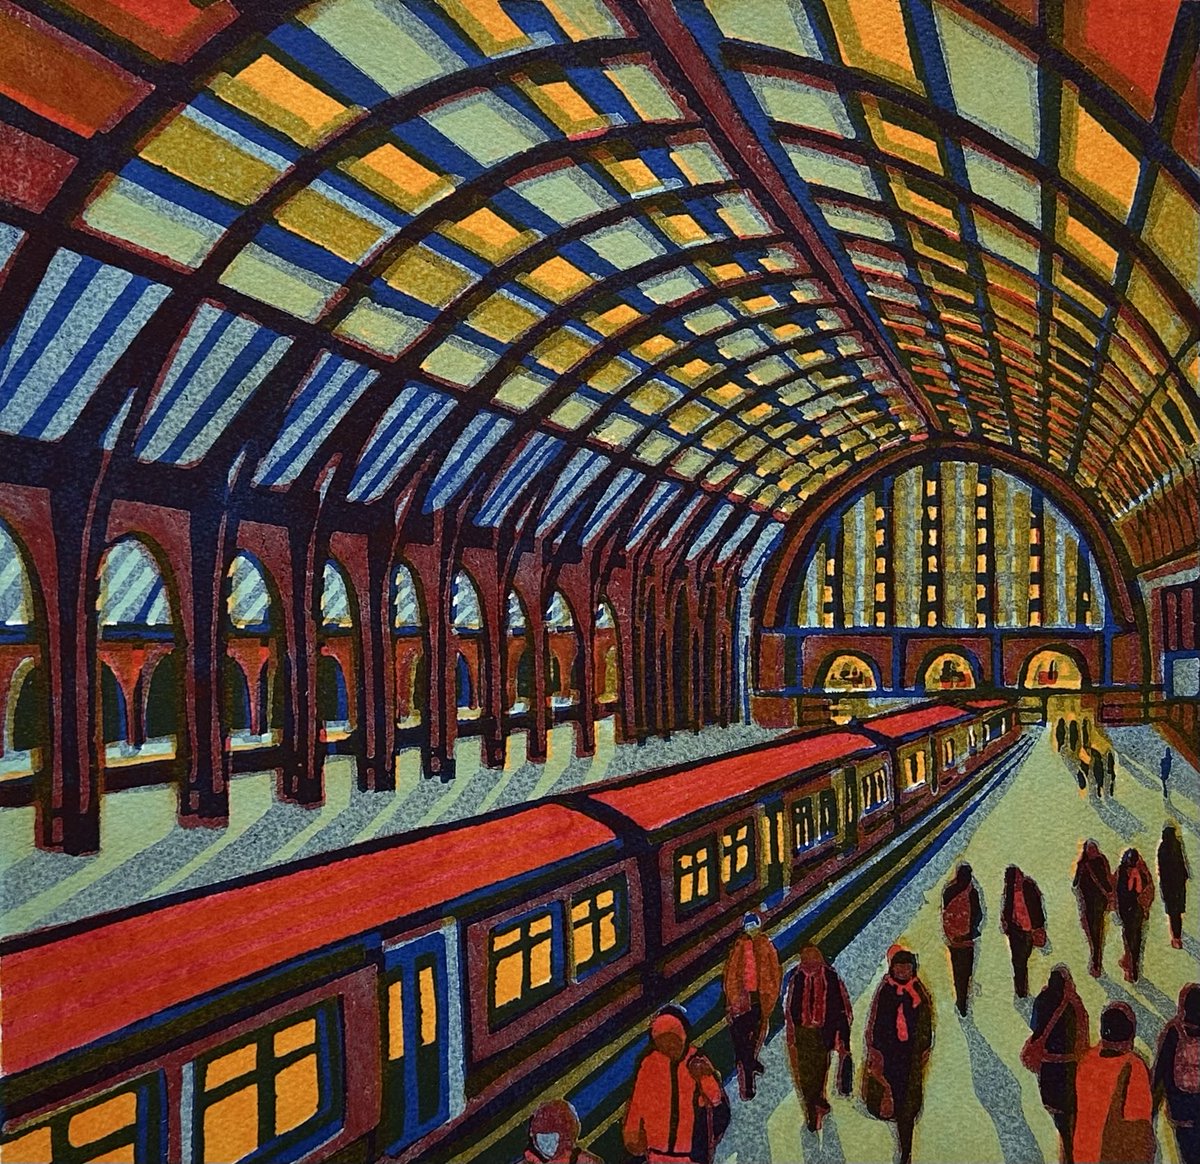 One of the trial proofs of my linocut ‘New Day Dawning’….
#KingsCrossStation #linocut #trainart